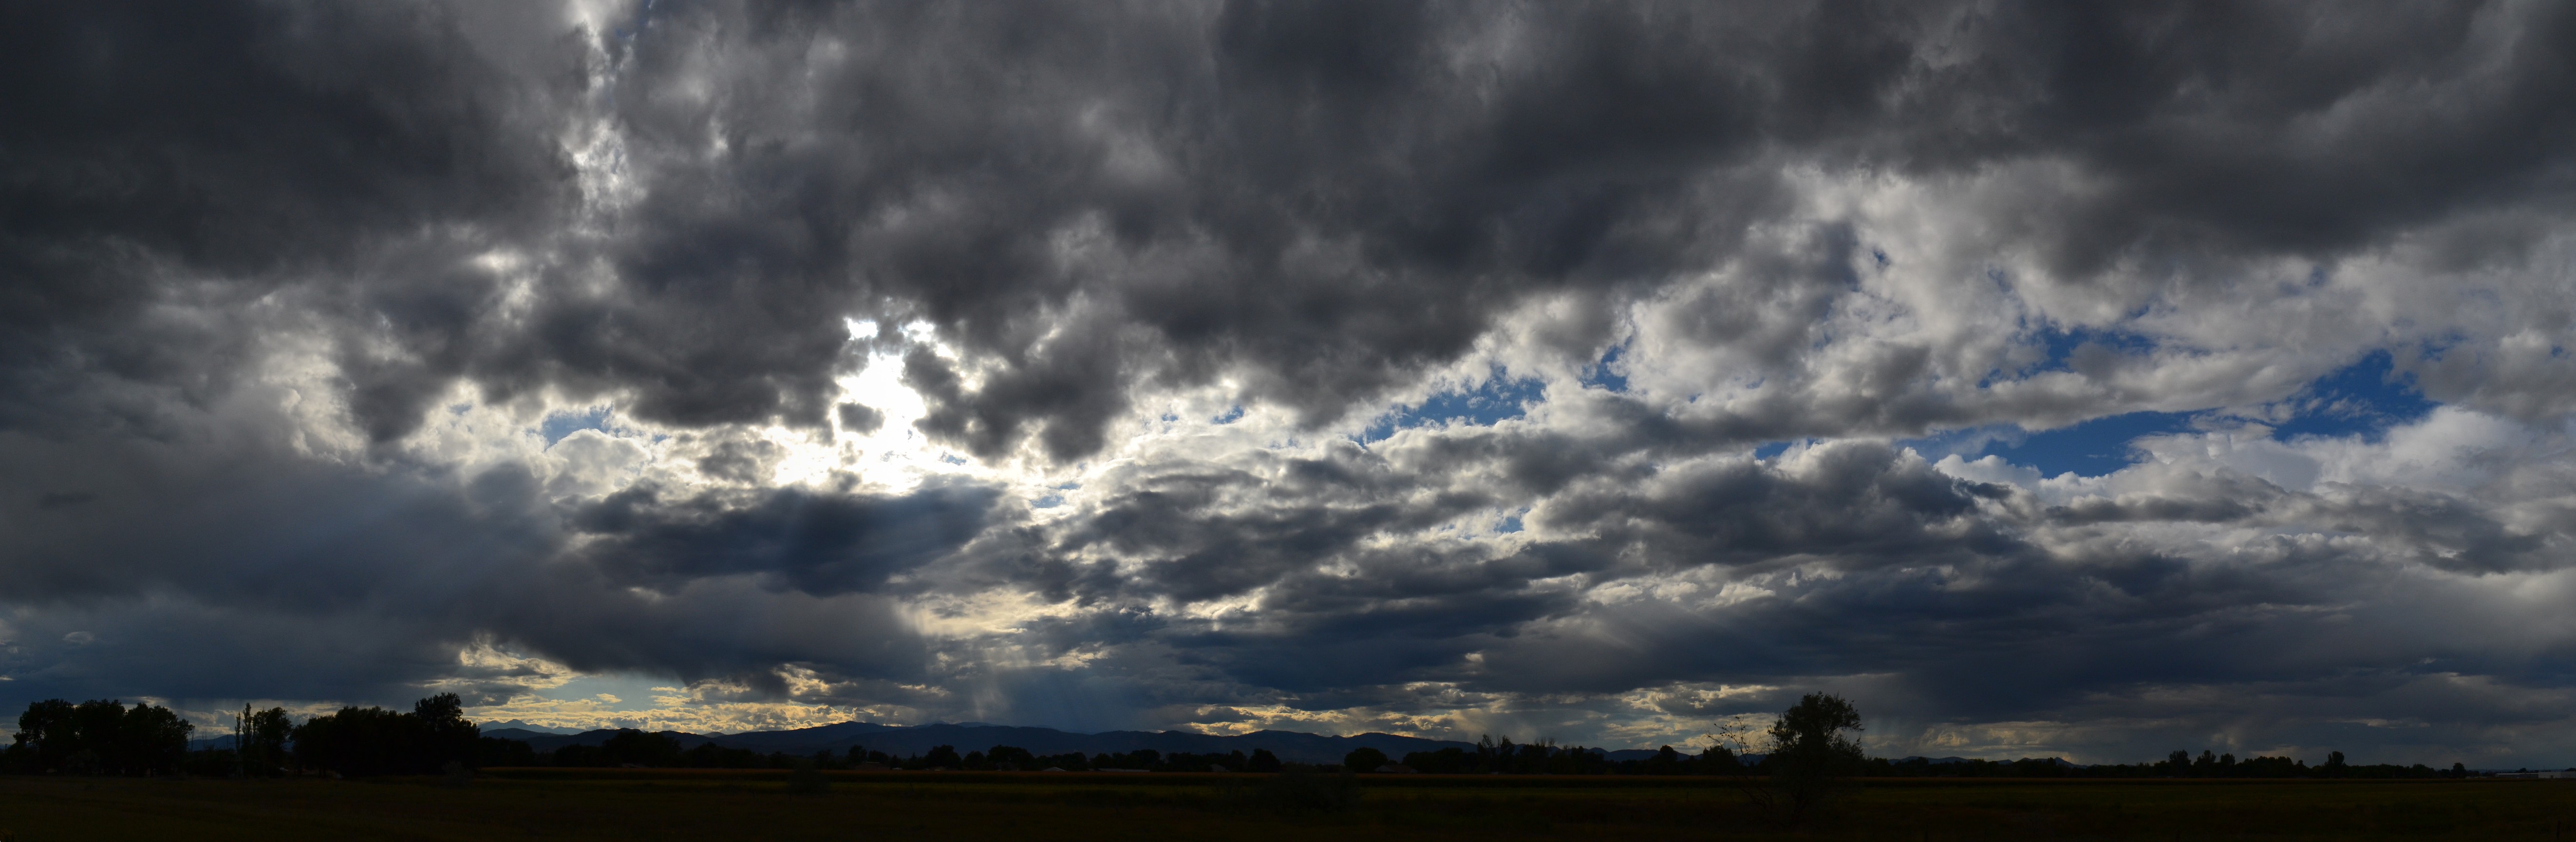 Stormy Clouds, Crepuscular Rays Panoramic, 2011-09-12 - Overcast ...